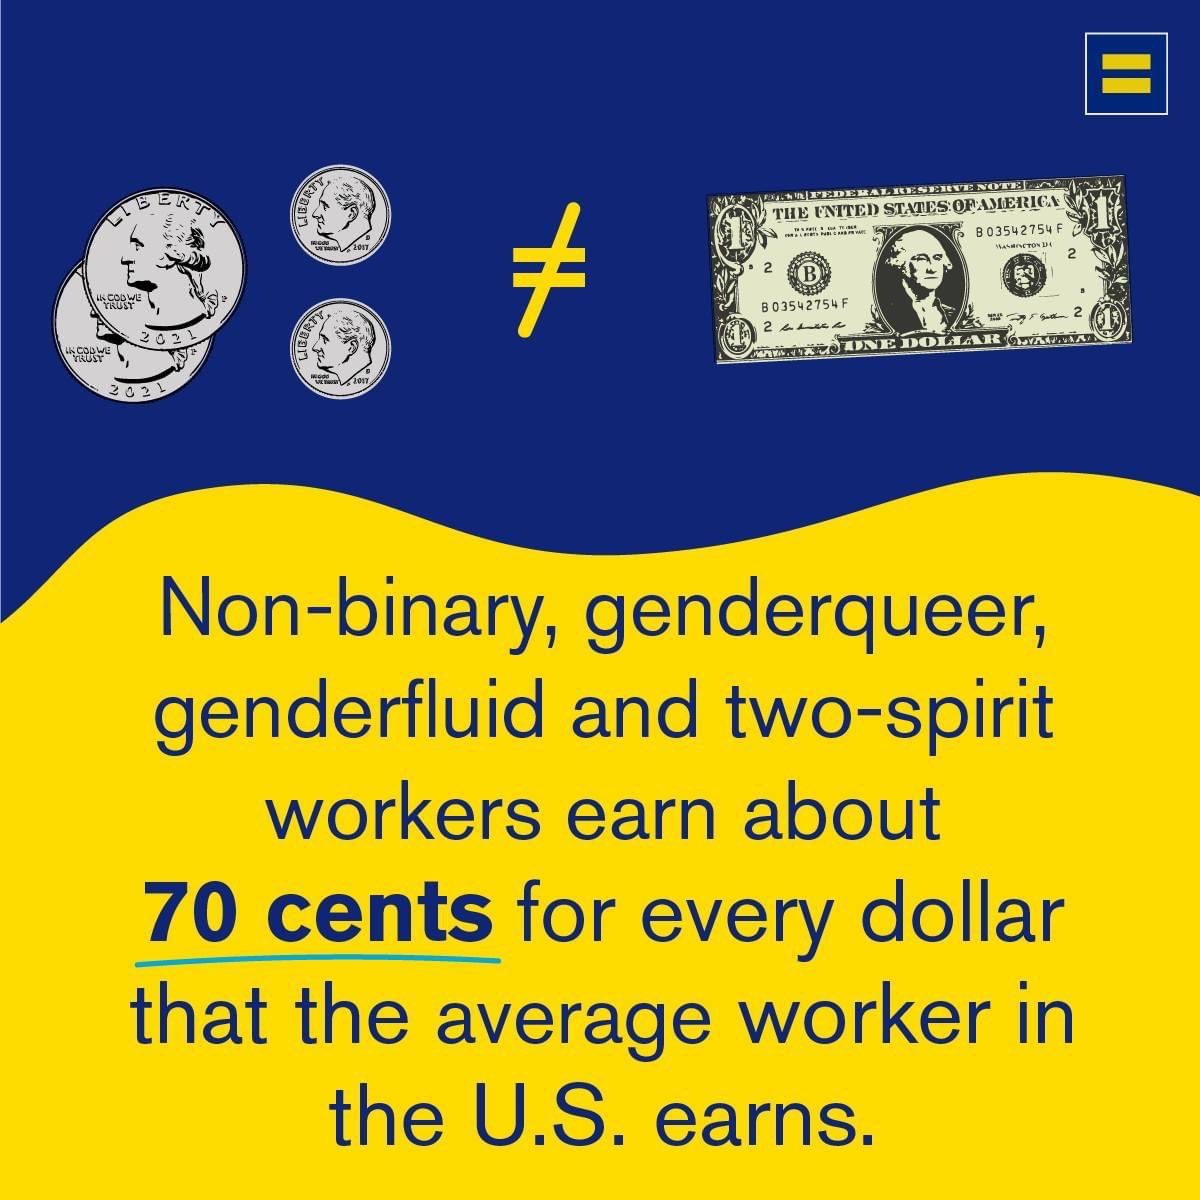 The #LGBTQIAEqualPay gap is even larger for transgender and non-binary workers. These pay discrepancies impact the ability to afford all aspects of daily life, including rent, food, transportation, healthcare, education & more. #LGBTQIAEqualPay #PrideInYourPay [🧵]